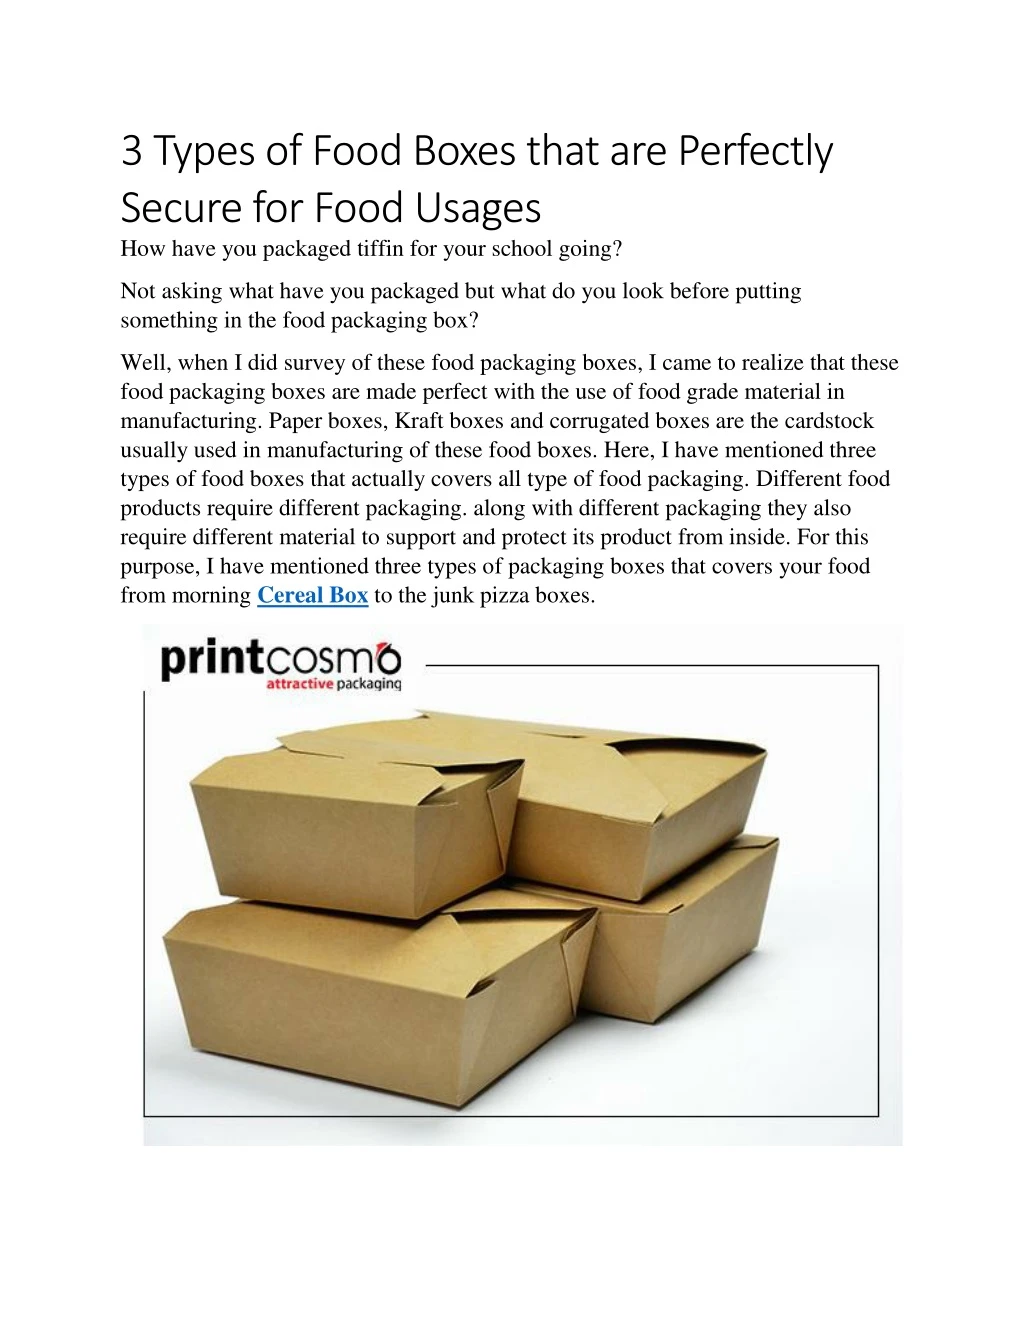 3 types of food boxes that are perfectly secure